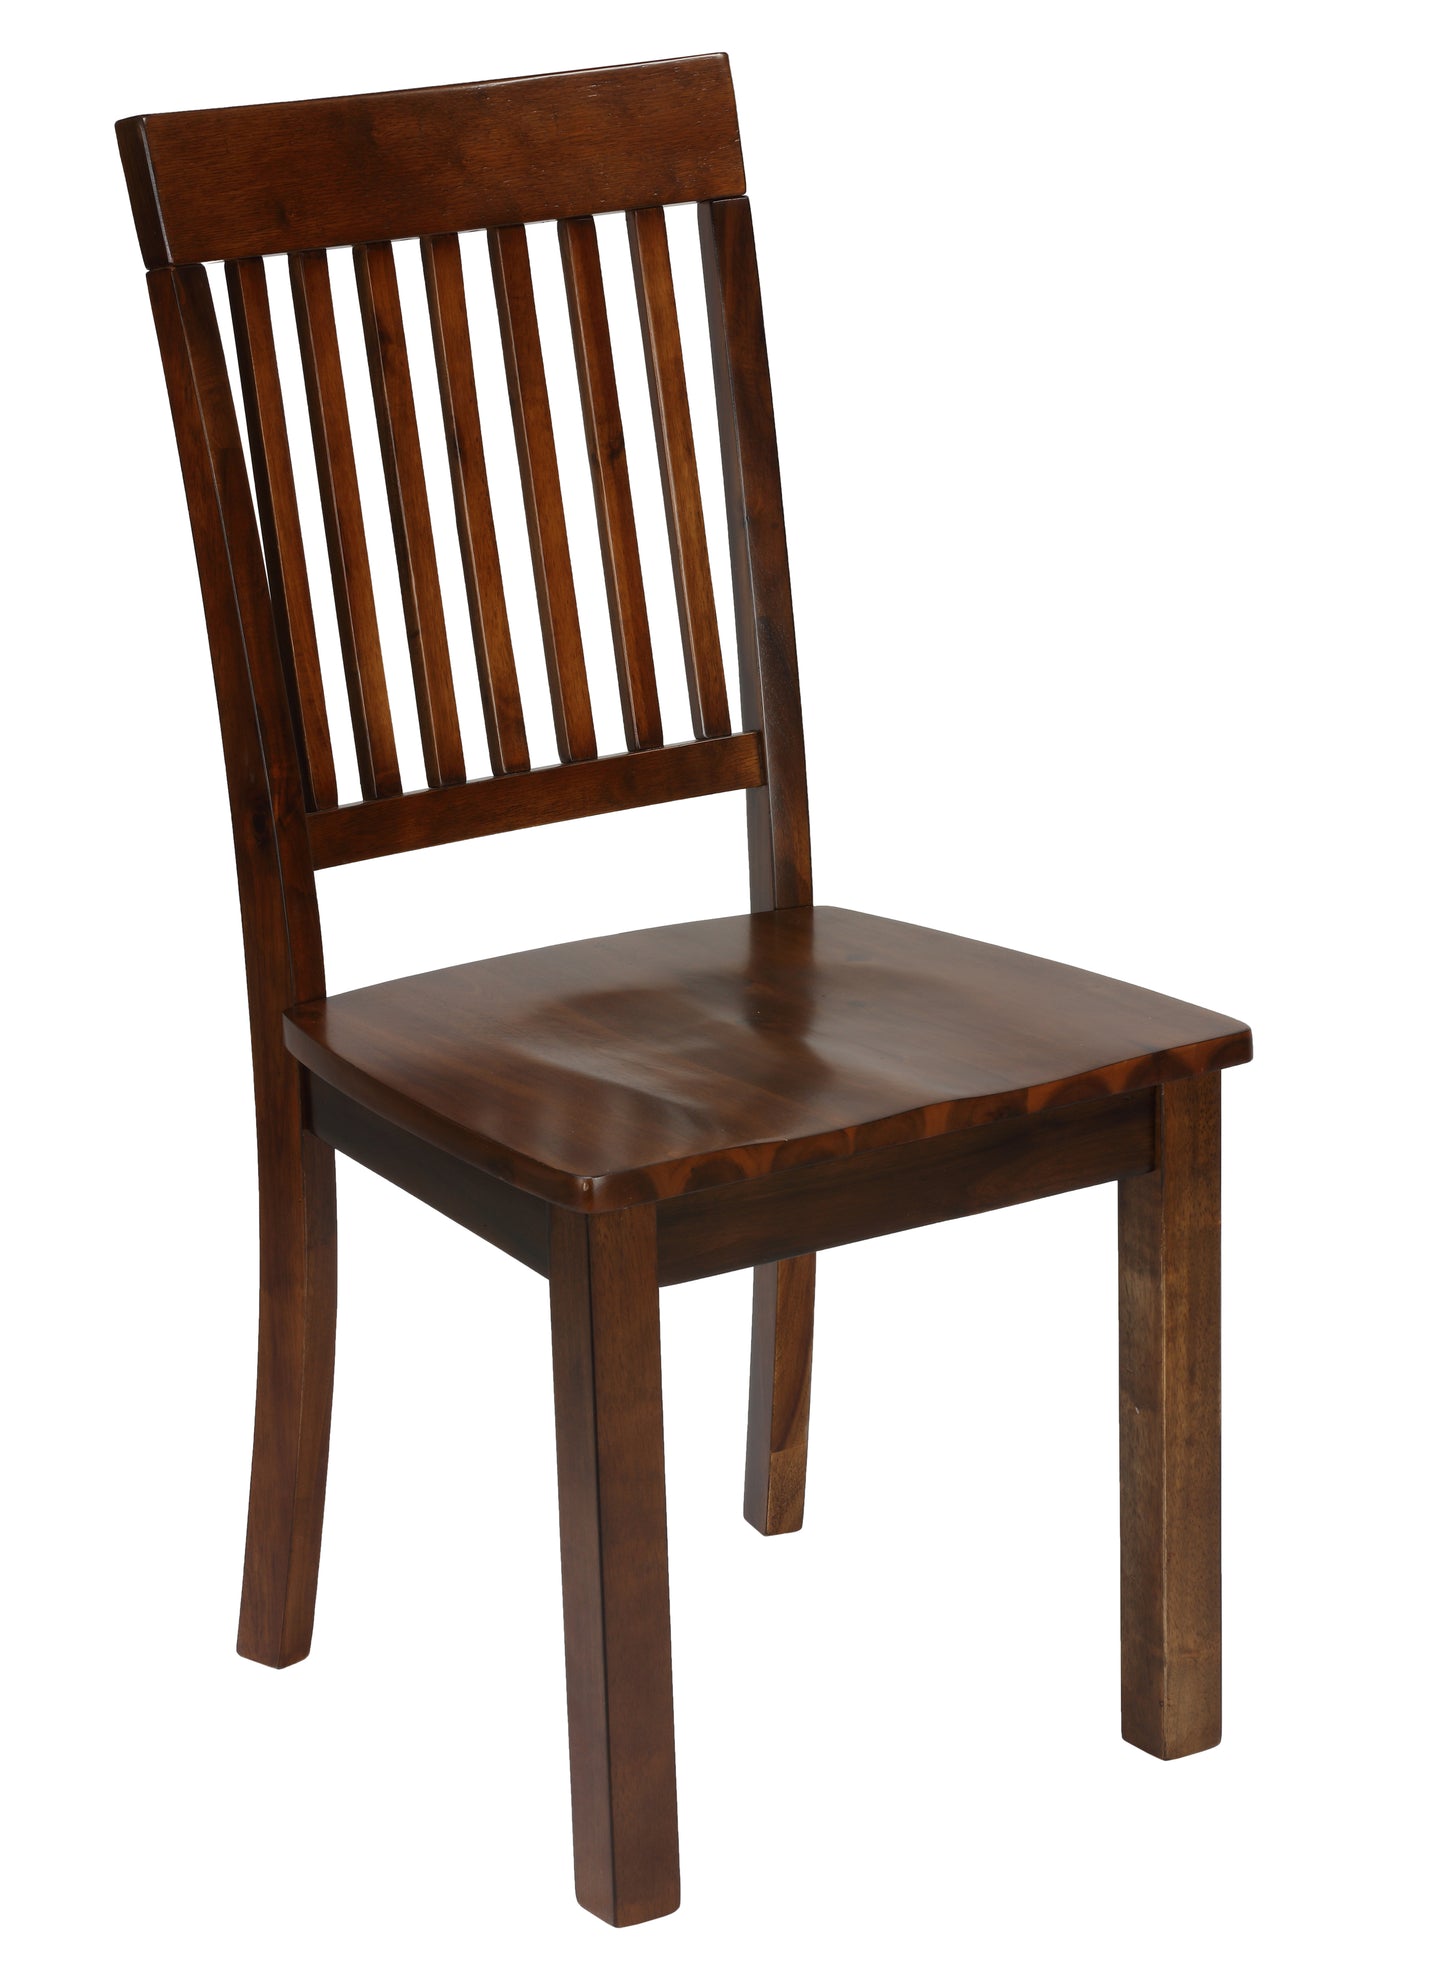 Cortesi Home Kingston Mission Style Dining Chairs in Solid Wood Walnut Finish, Set of 2